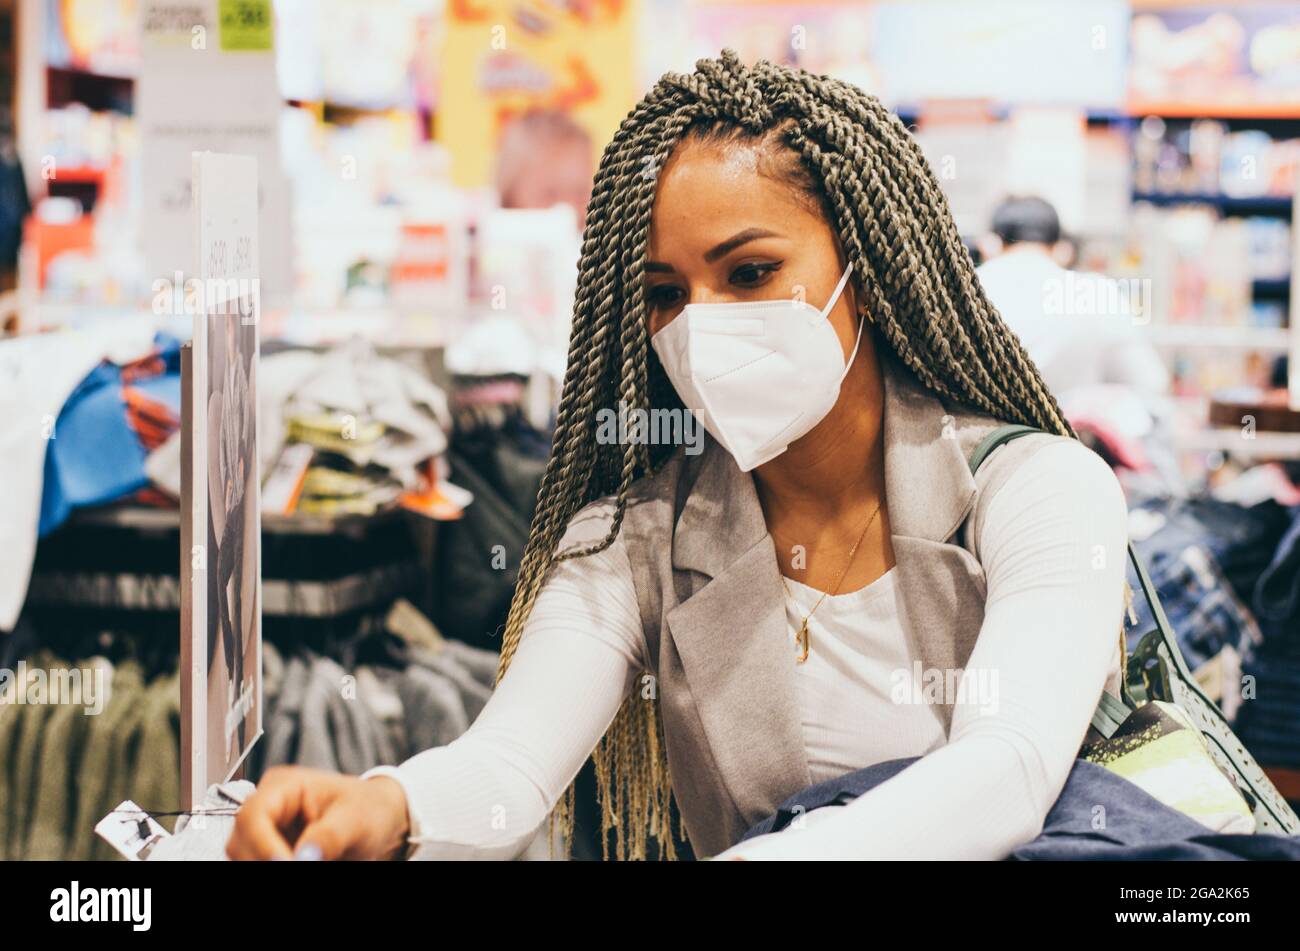 Beautiful woman with braids and protective mask on her face antivirus ...